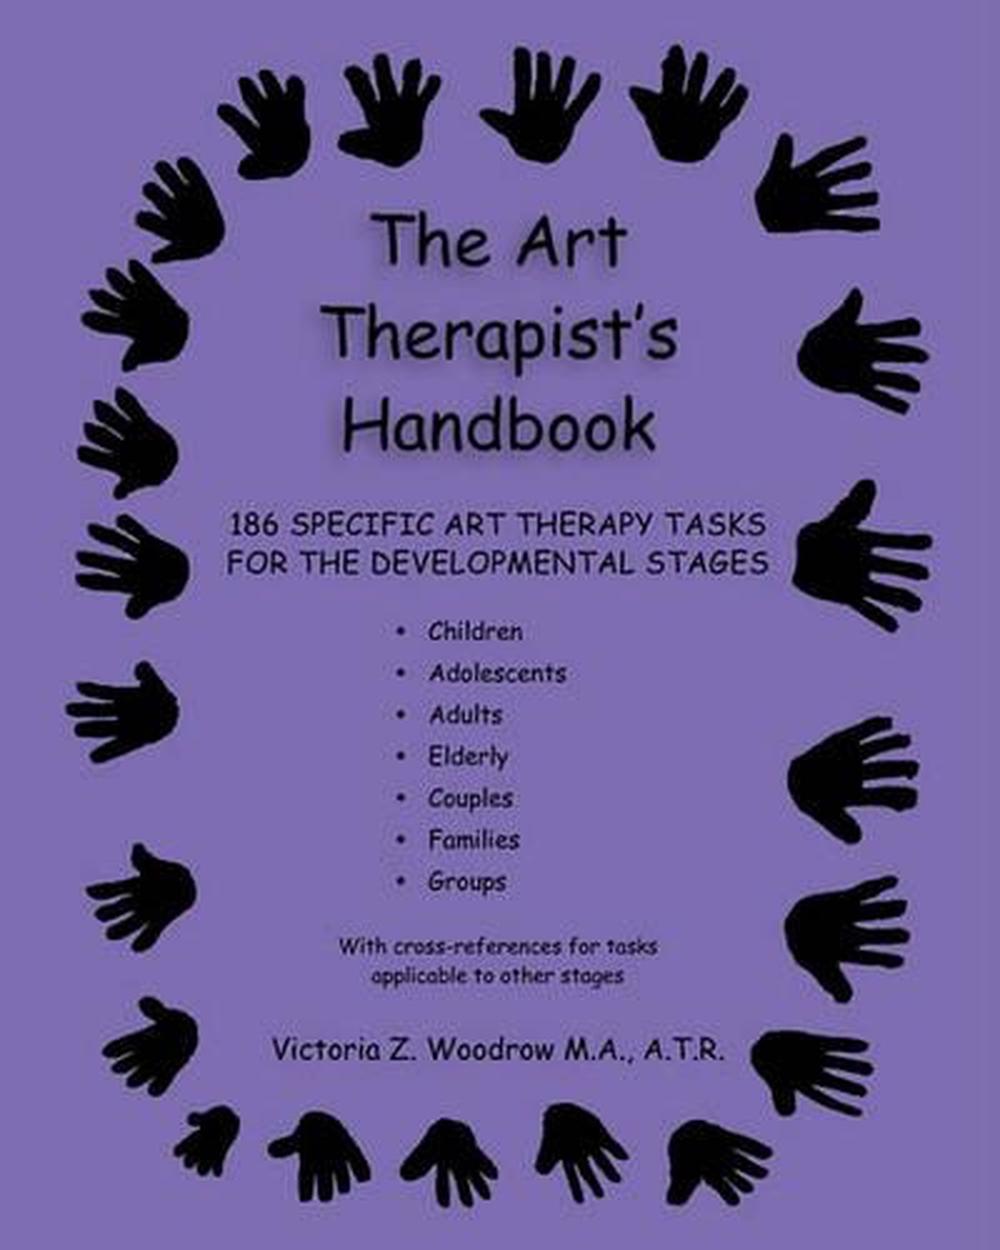 The Art Therapists Handbook 186 Specific Art Therapy Tasks for the
Developmental Stages Epub-Ebook